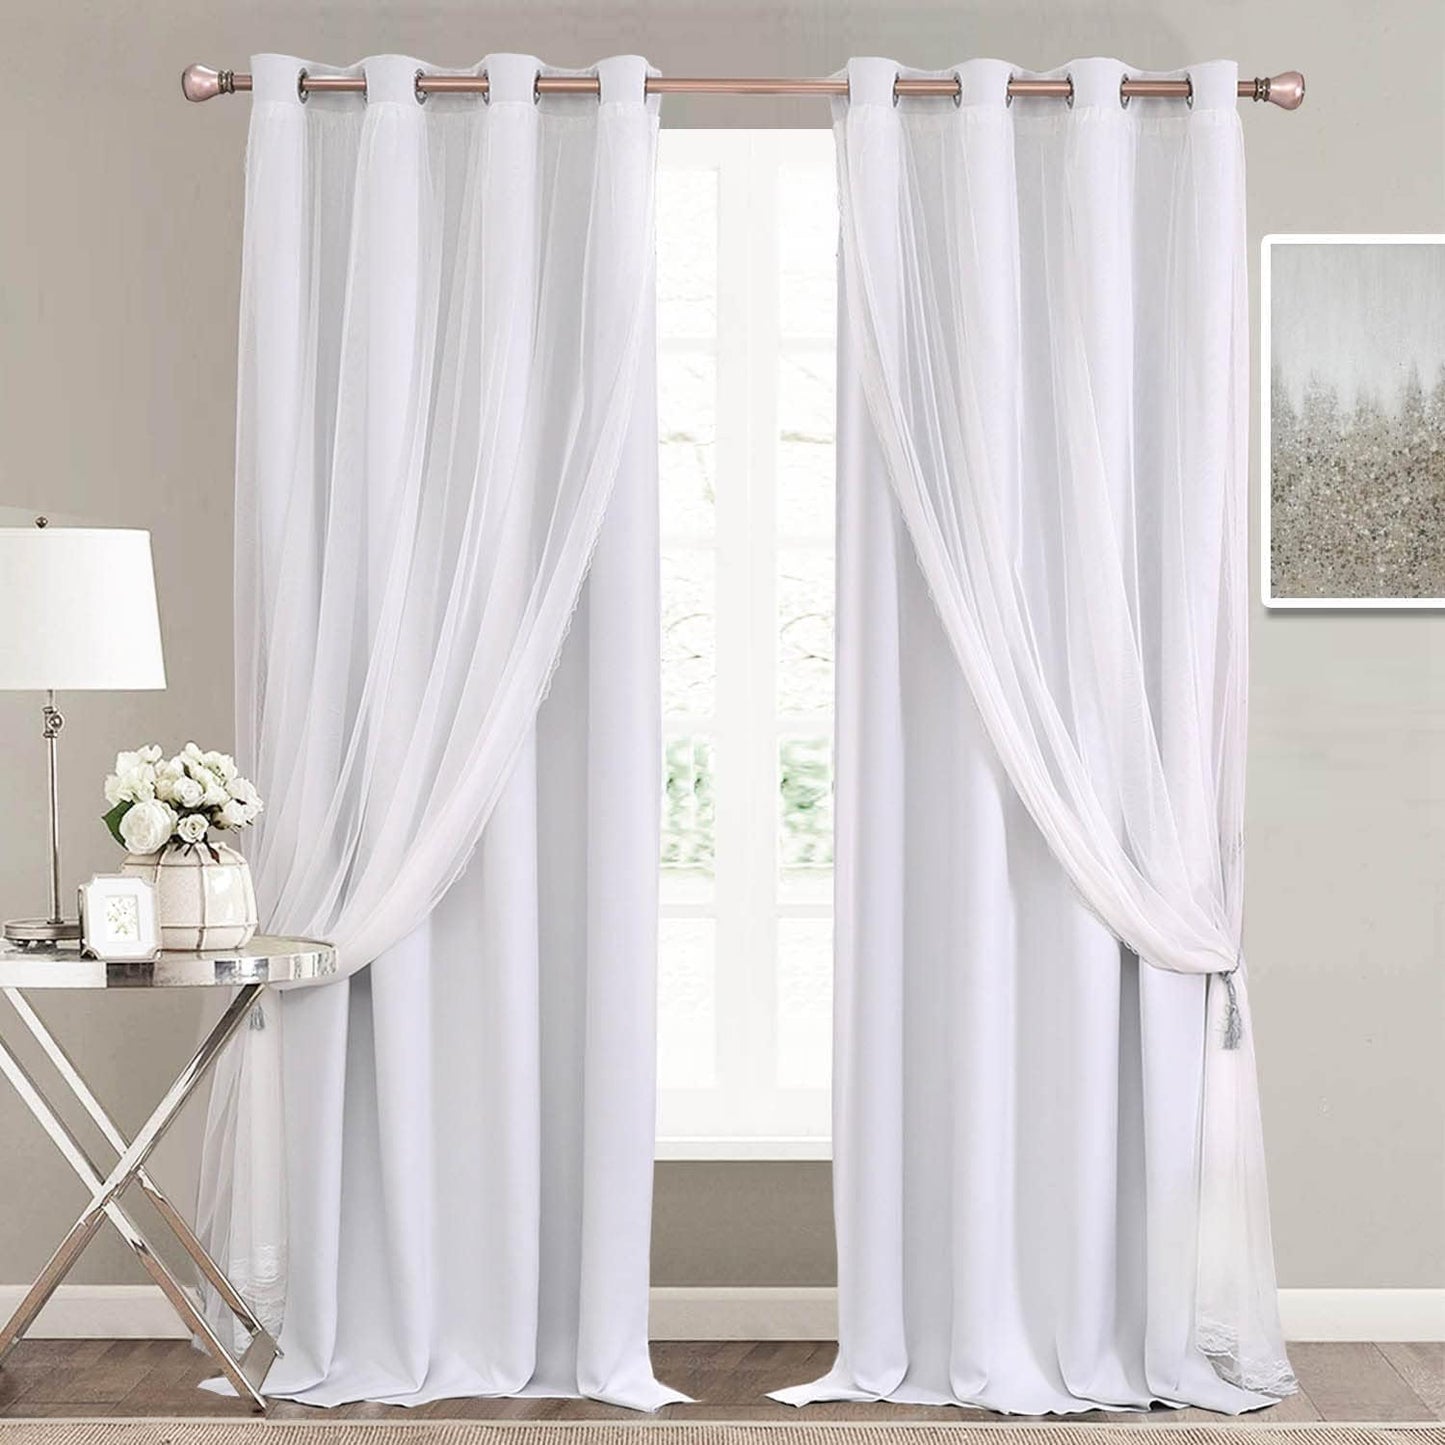 Pink Blackout Curtains 84 Inch Length - Double Layers Princess Girls Curtains & Draperies Panels for Kids Bedroom Living Room Nursery Pink Lace Hem Room Darkening Curtains, 2 Pcs  SOFJAGETQ Greyish White 52 X 90 